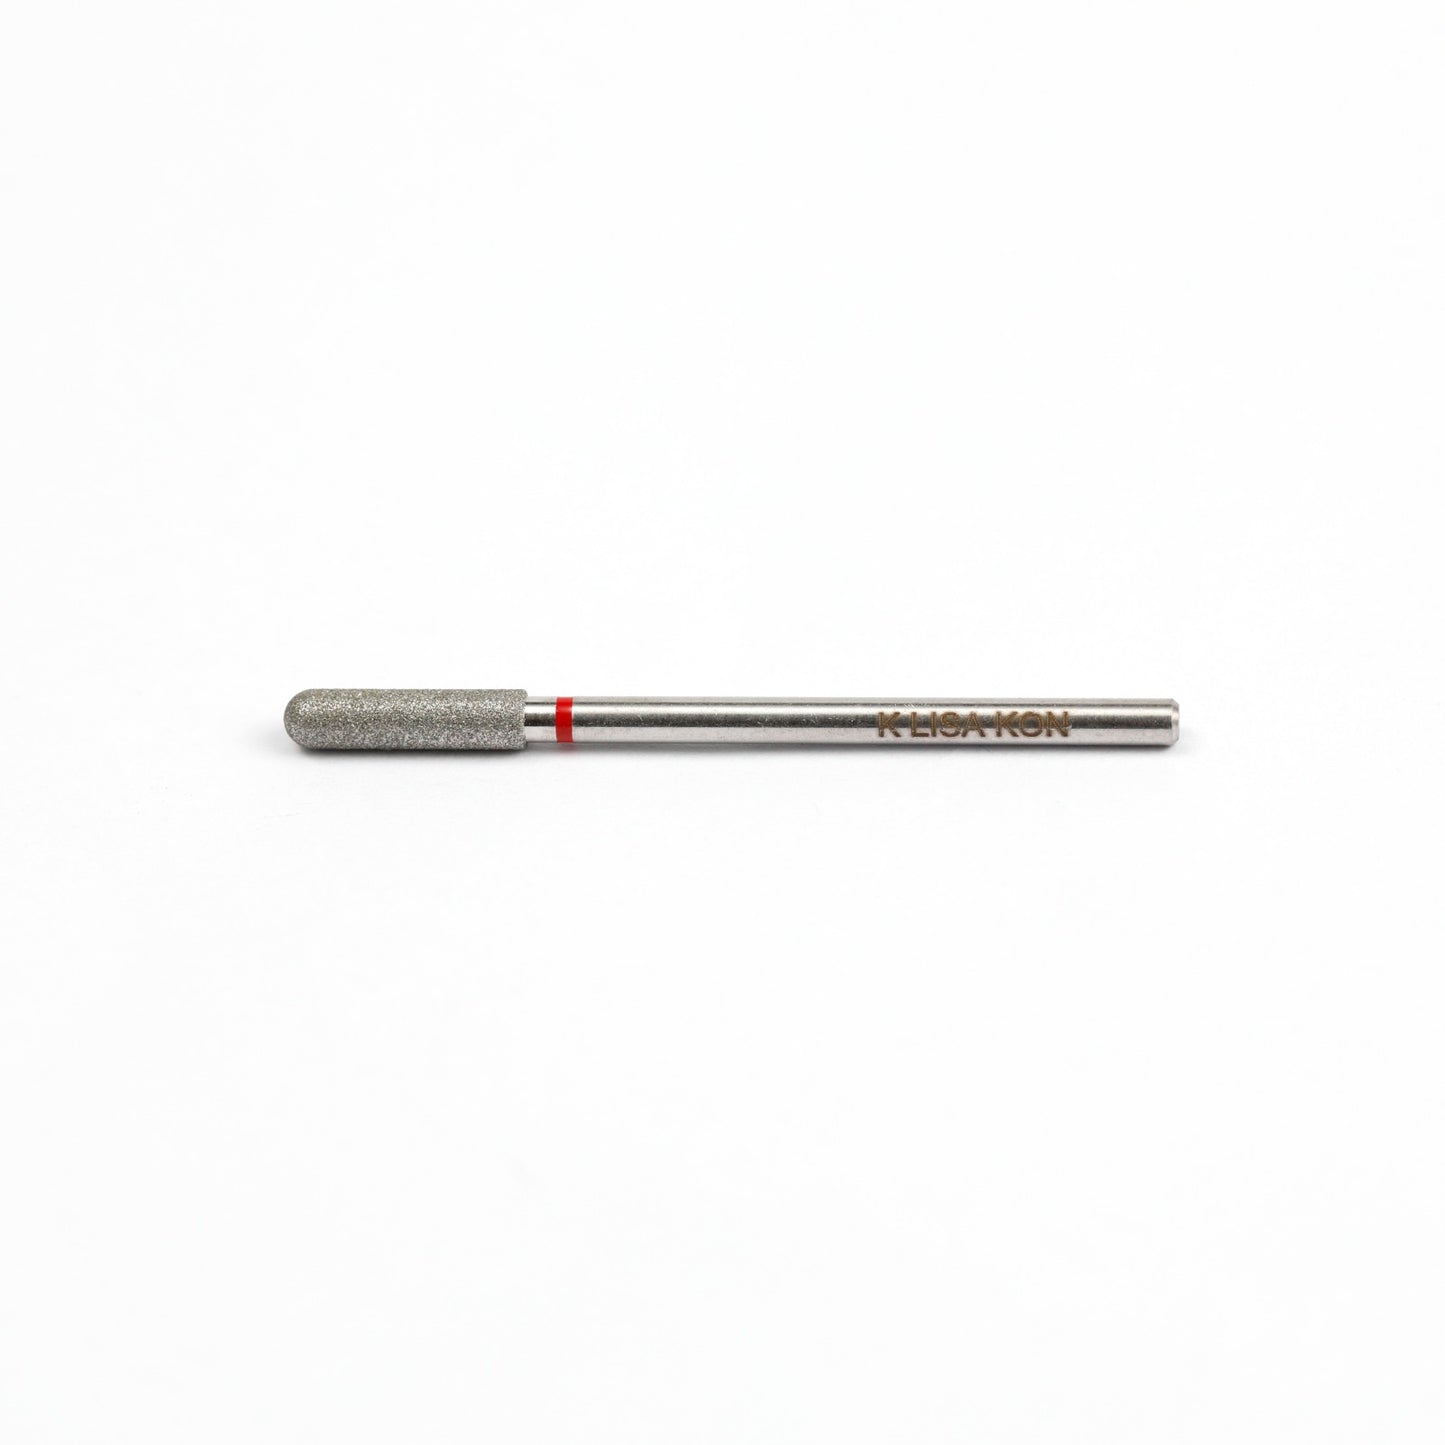 Lisakon - Diamond nail drill bit, rounded “cylinder”, 2.3 mm/ working part 8 mm